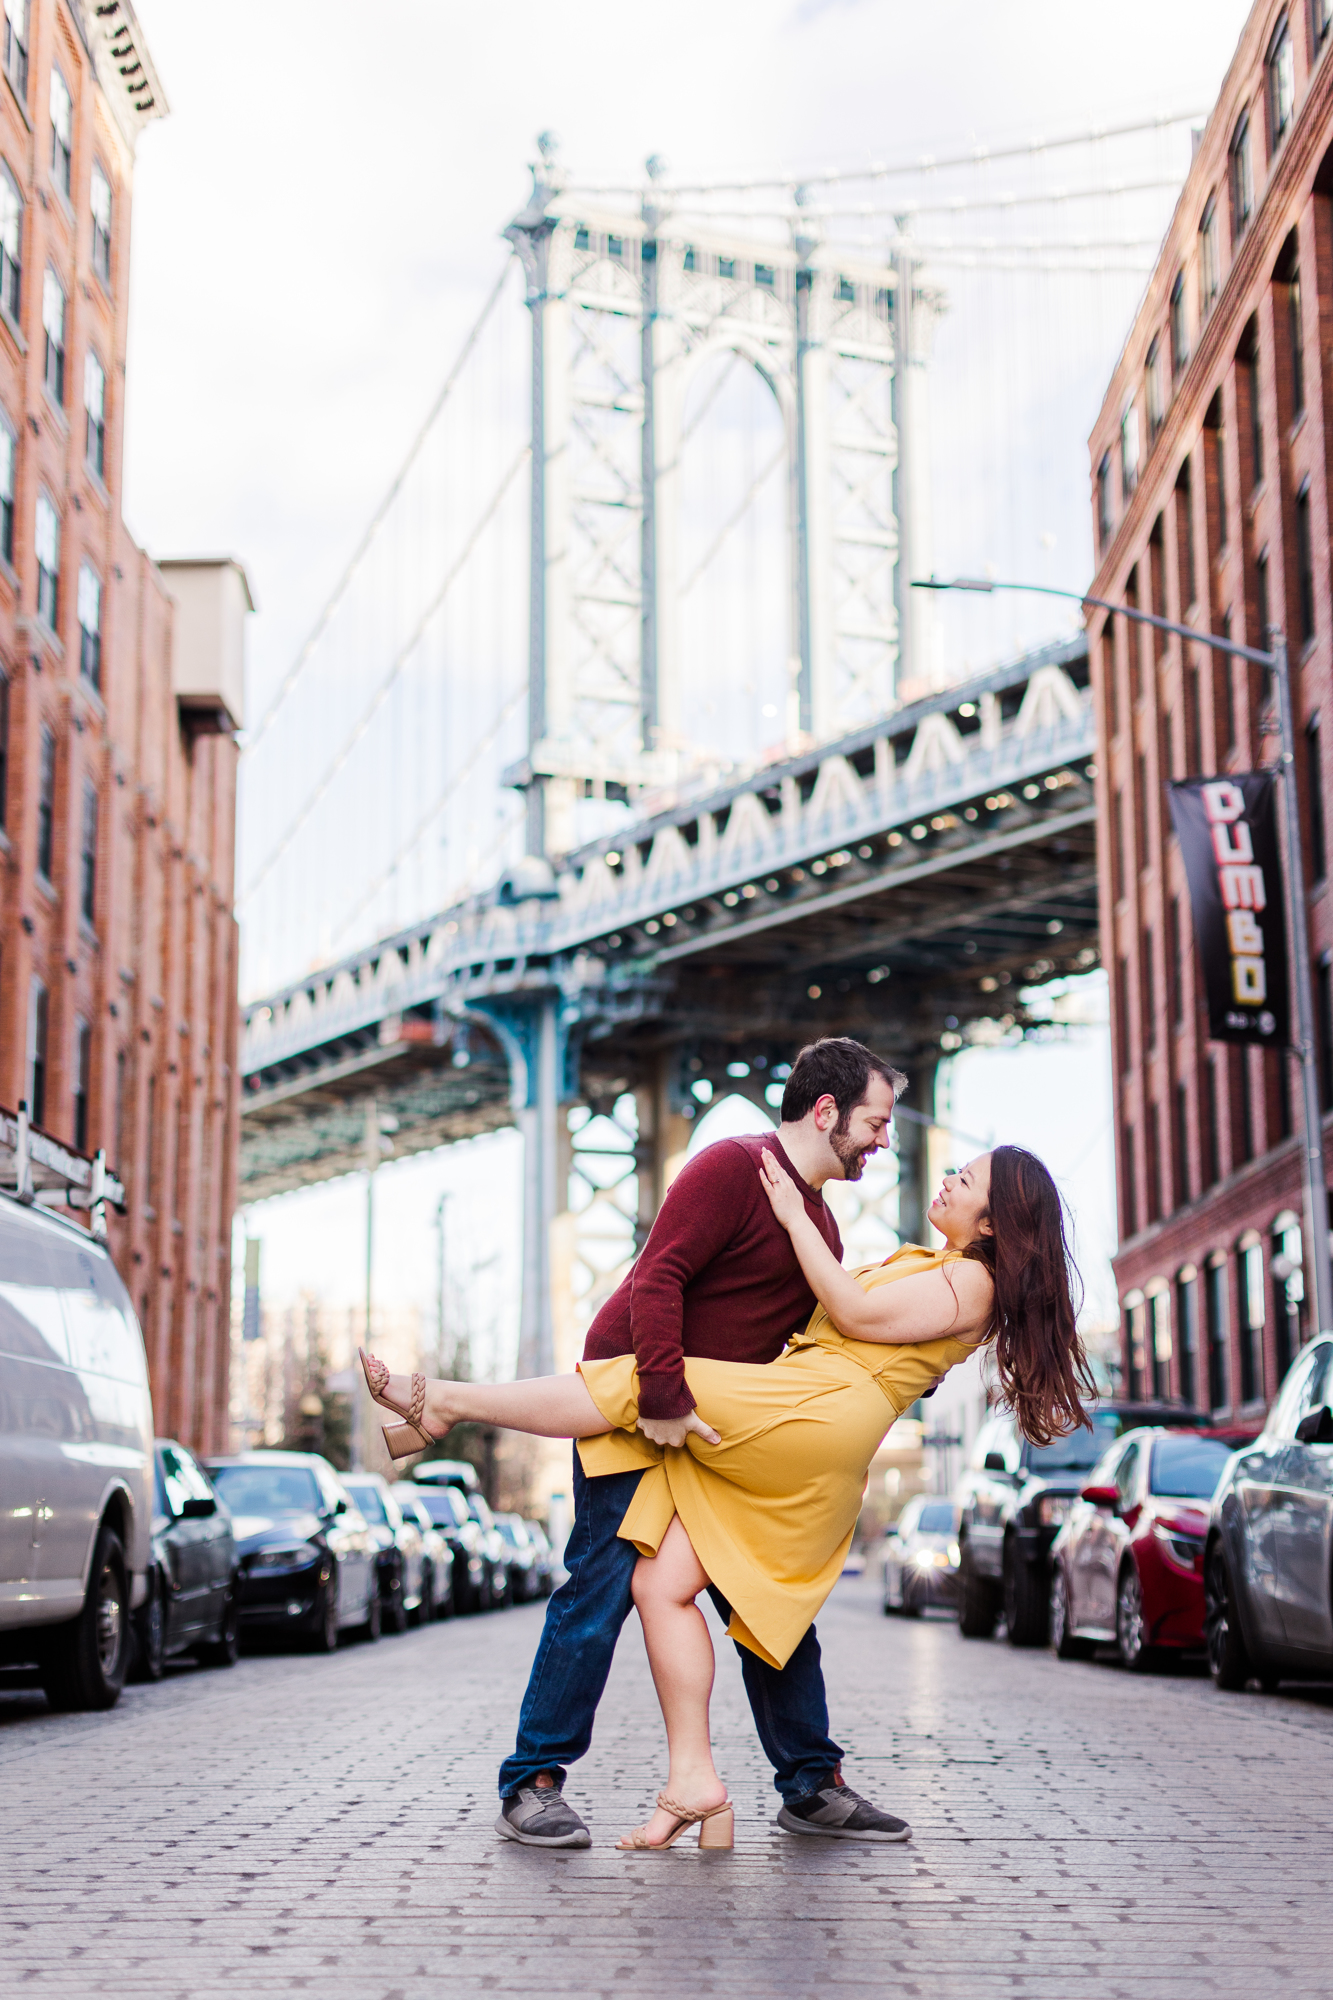 Striking Brooklyn Bridge Engagement Photography with Matching Outfits